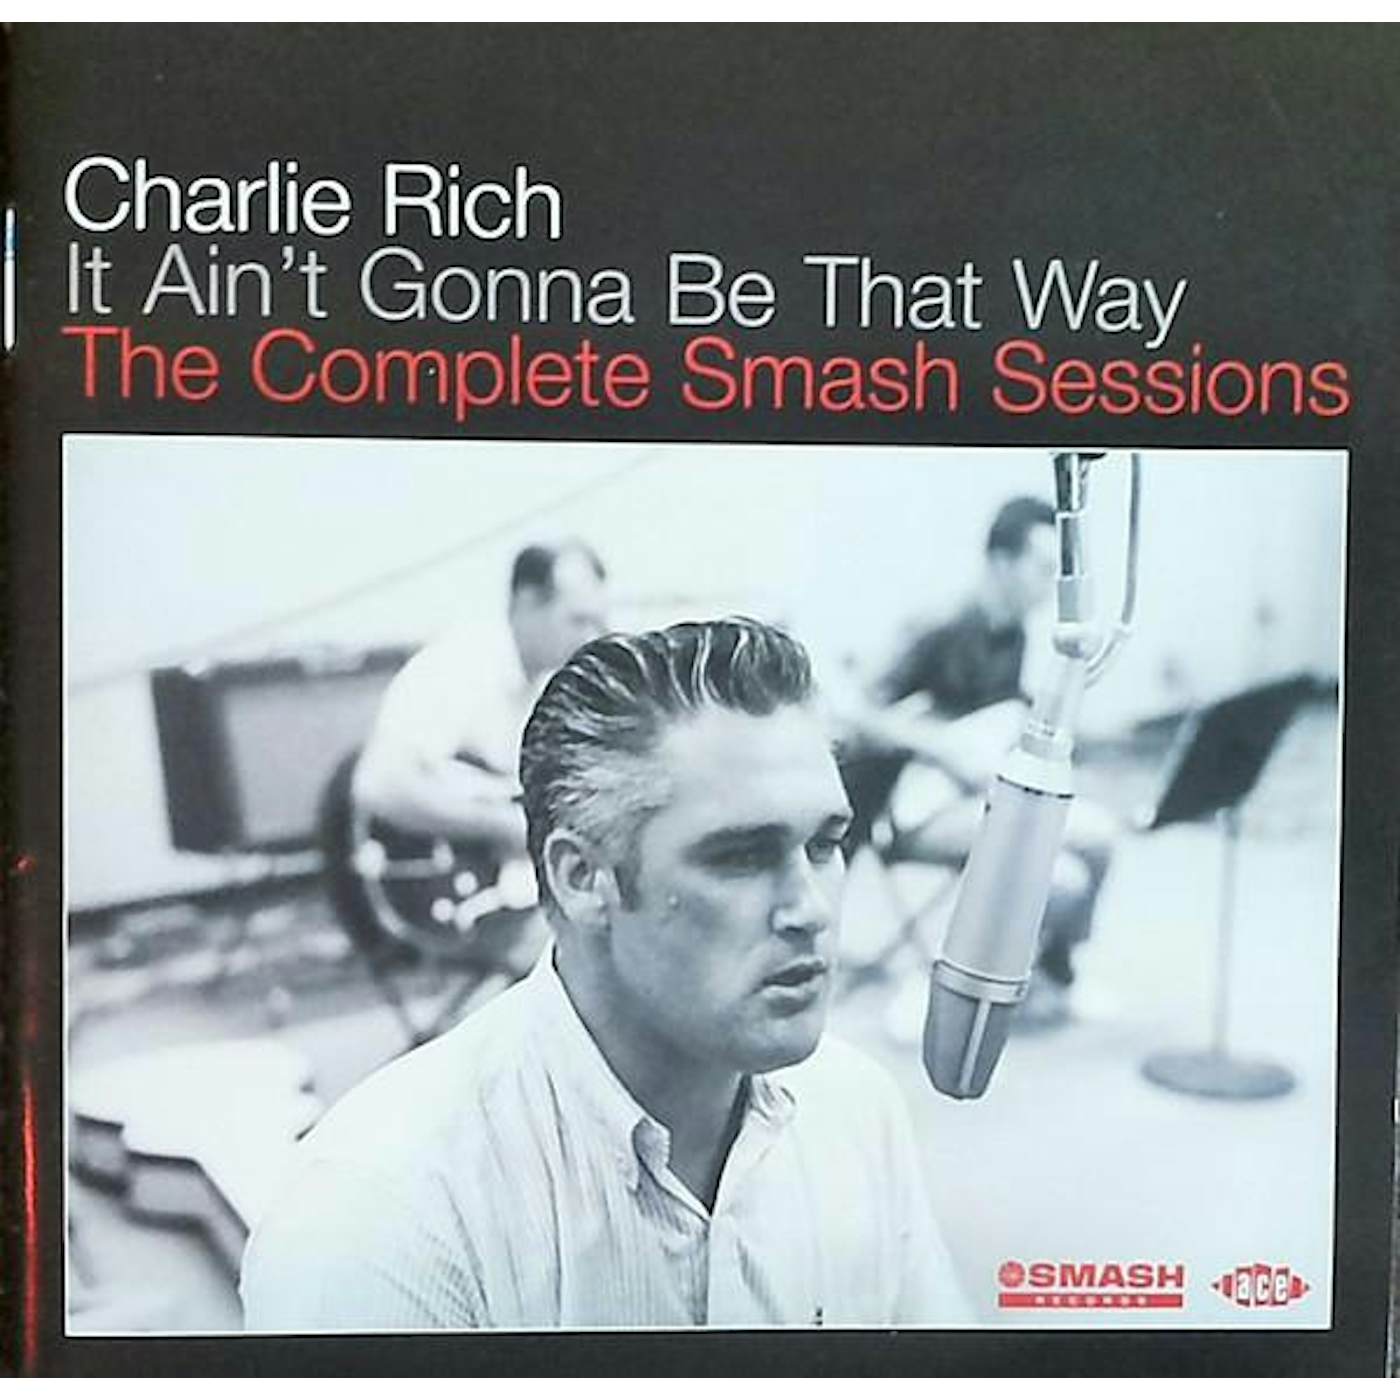 Charlie Rich IT AIN'T GONNA BE THAT WAY: COMPL SMASH SESSIONS CD